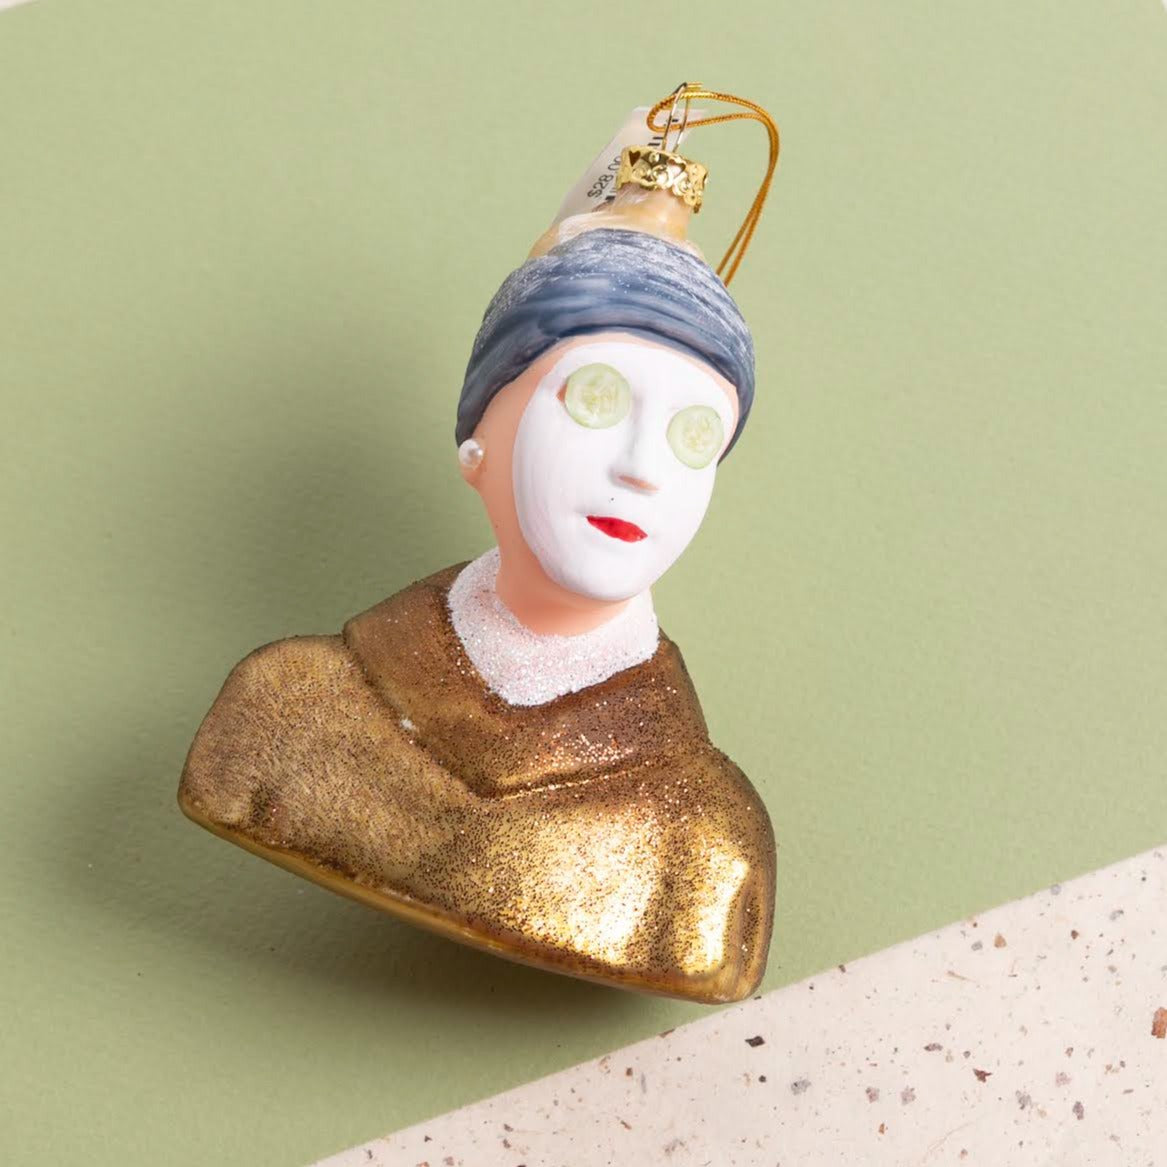 Girl With Pearl Earring Spa Edition Ornament - P I C N I C 